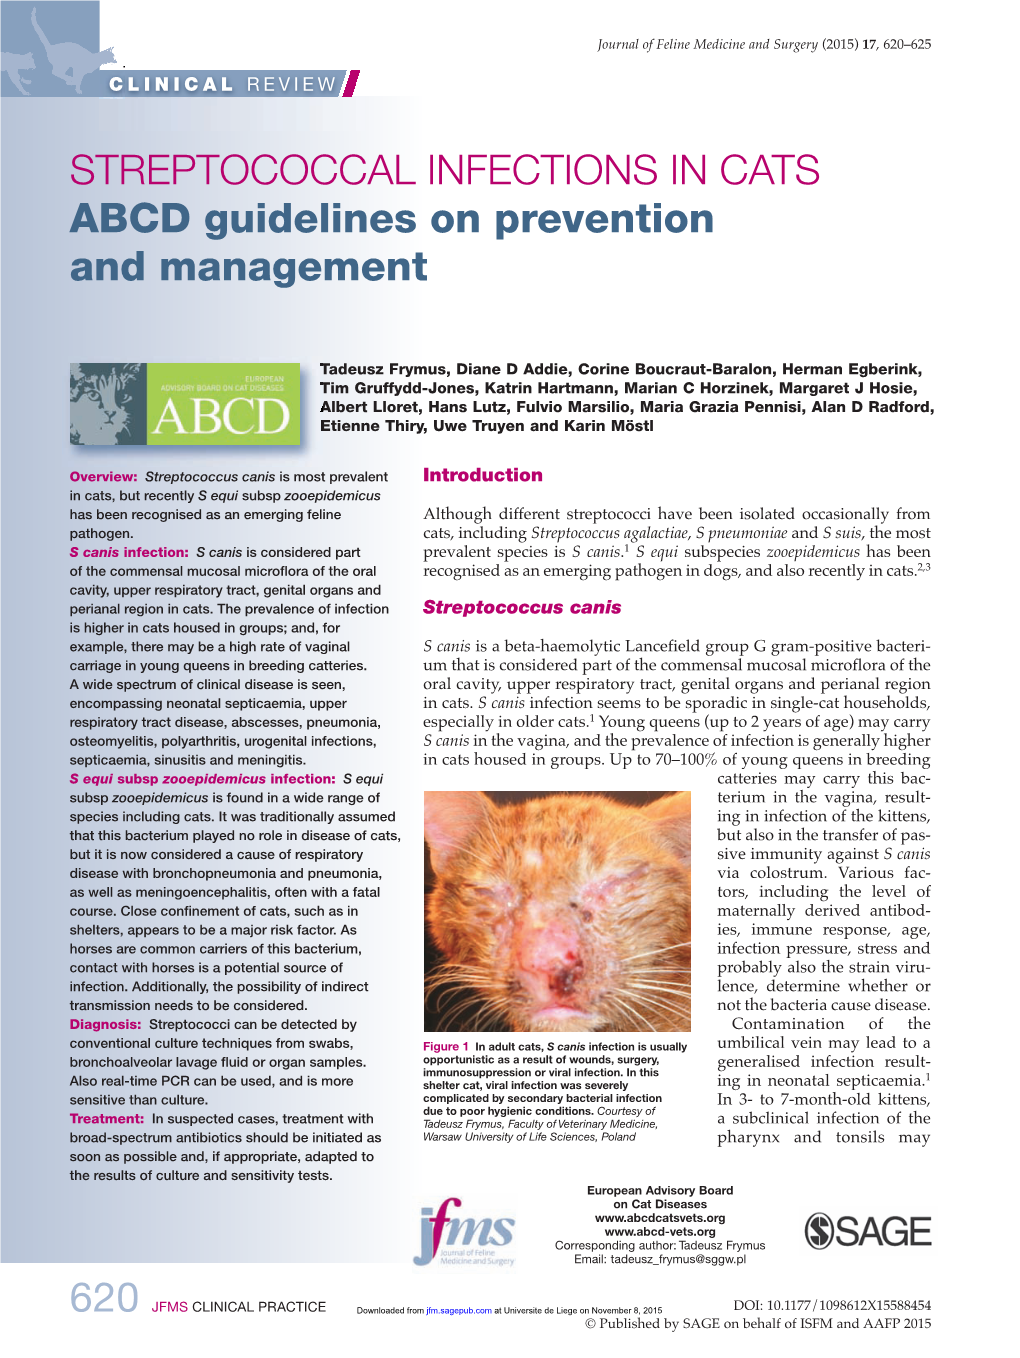 STREPTOCOCCAL INFECTIONS in CATS ABCD Guidelines on Prevention and Management